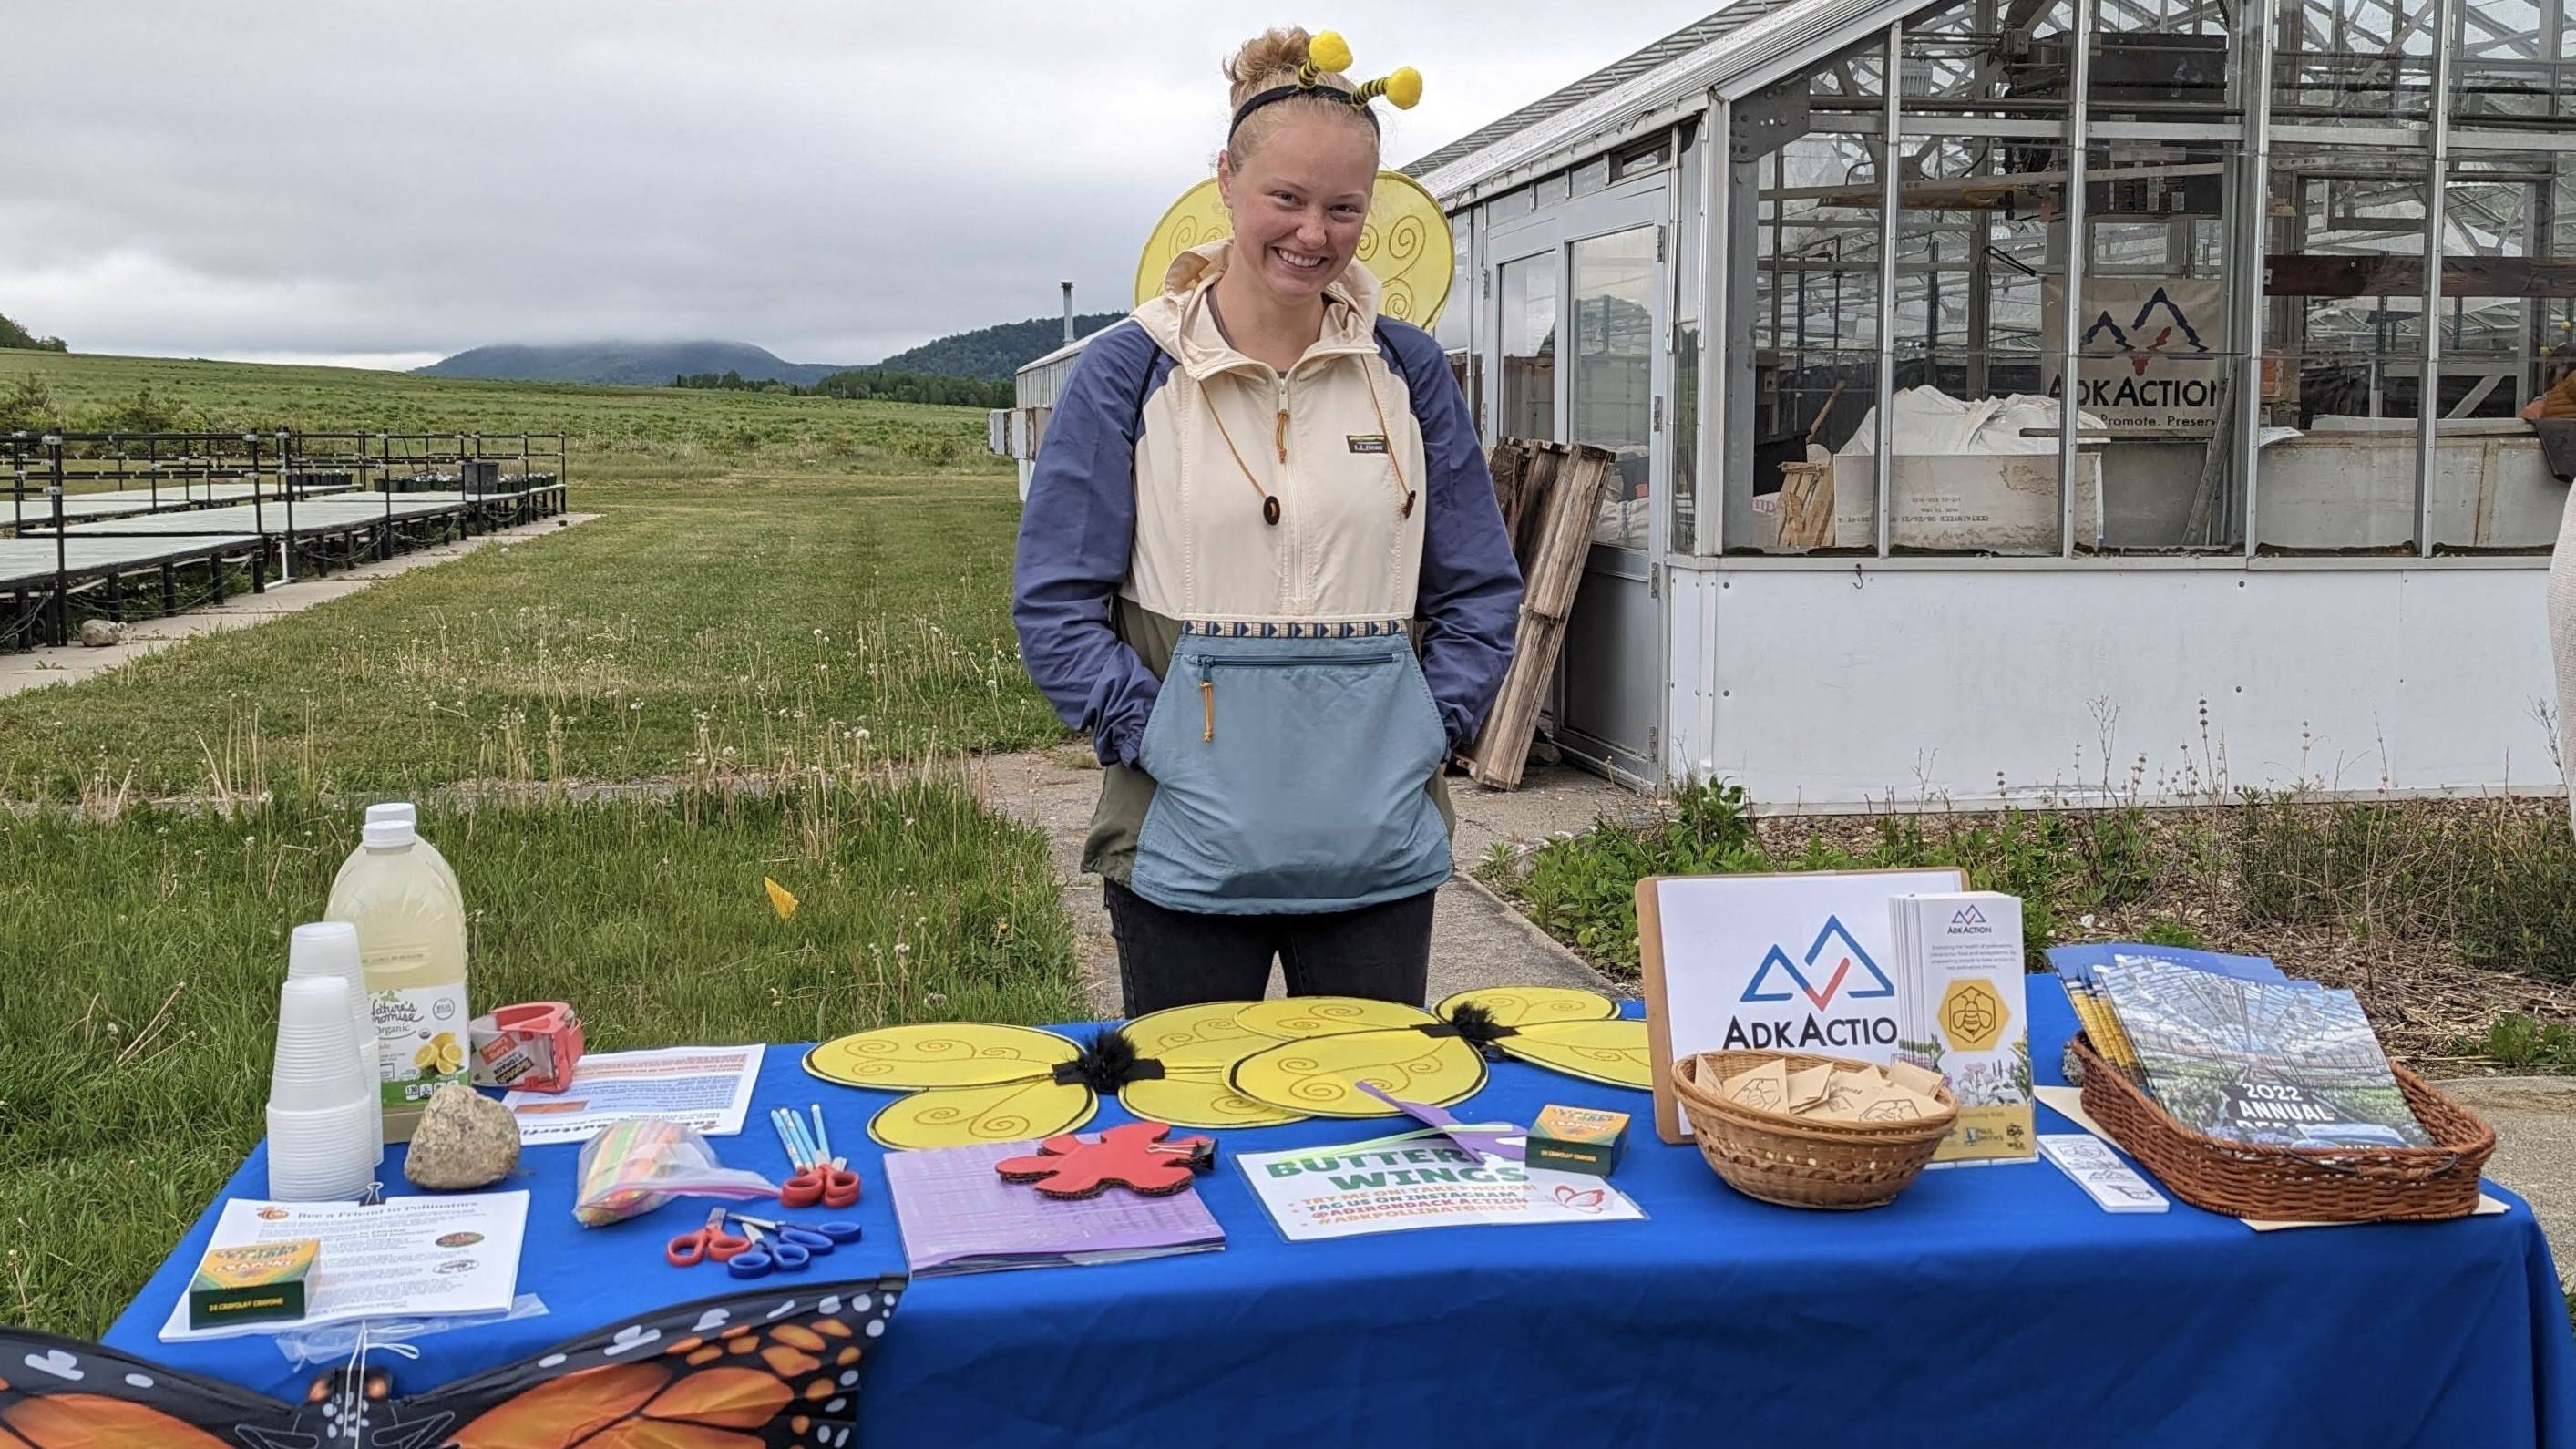 Kayla handing out promotional materials at an AdkAction event